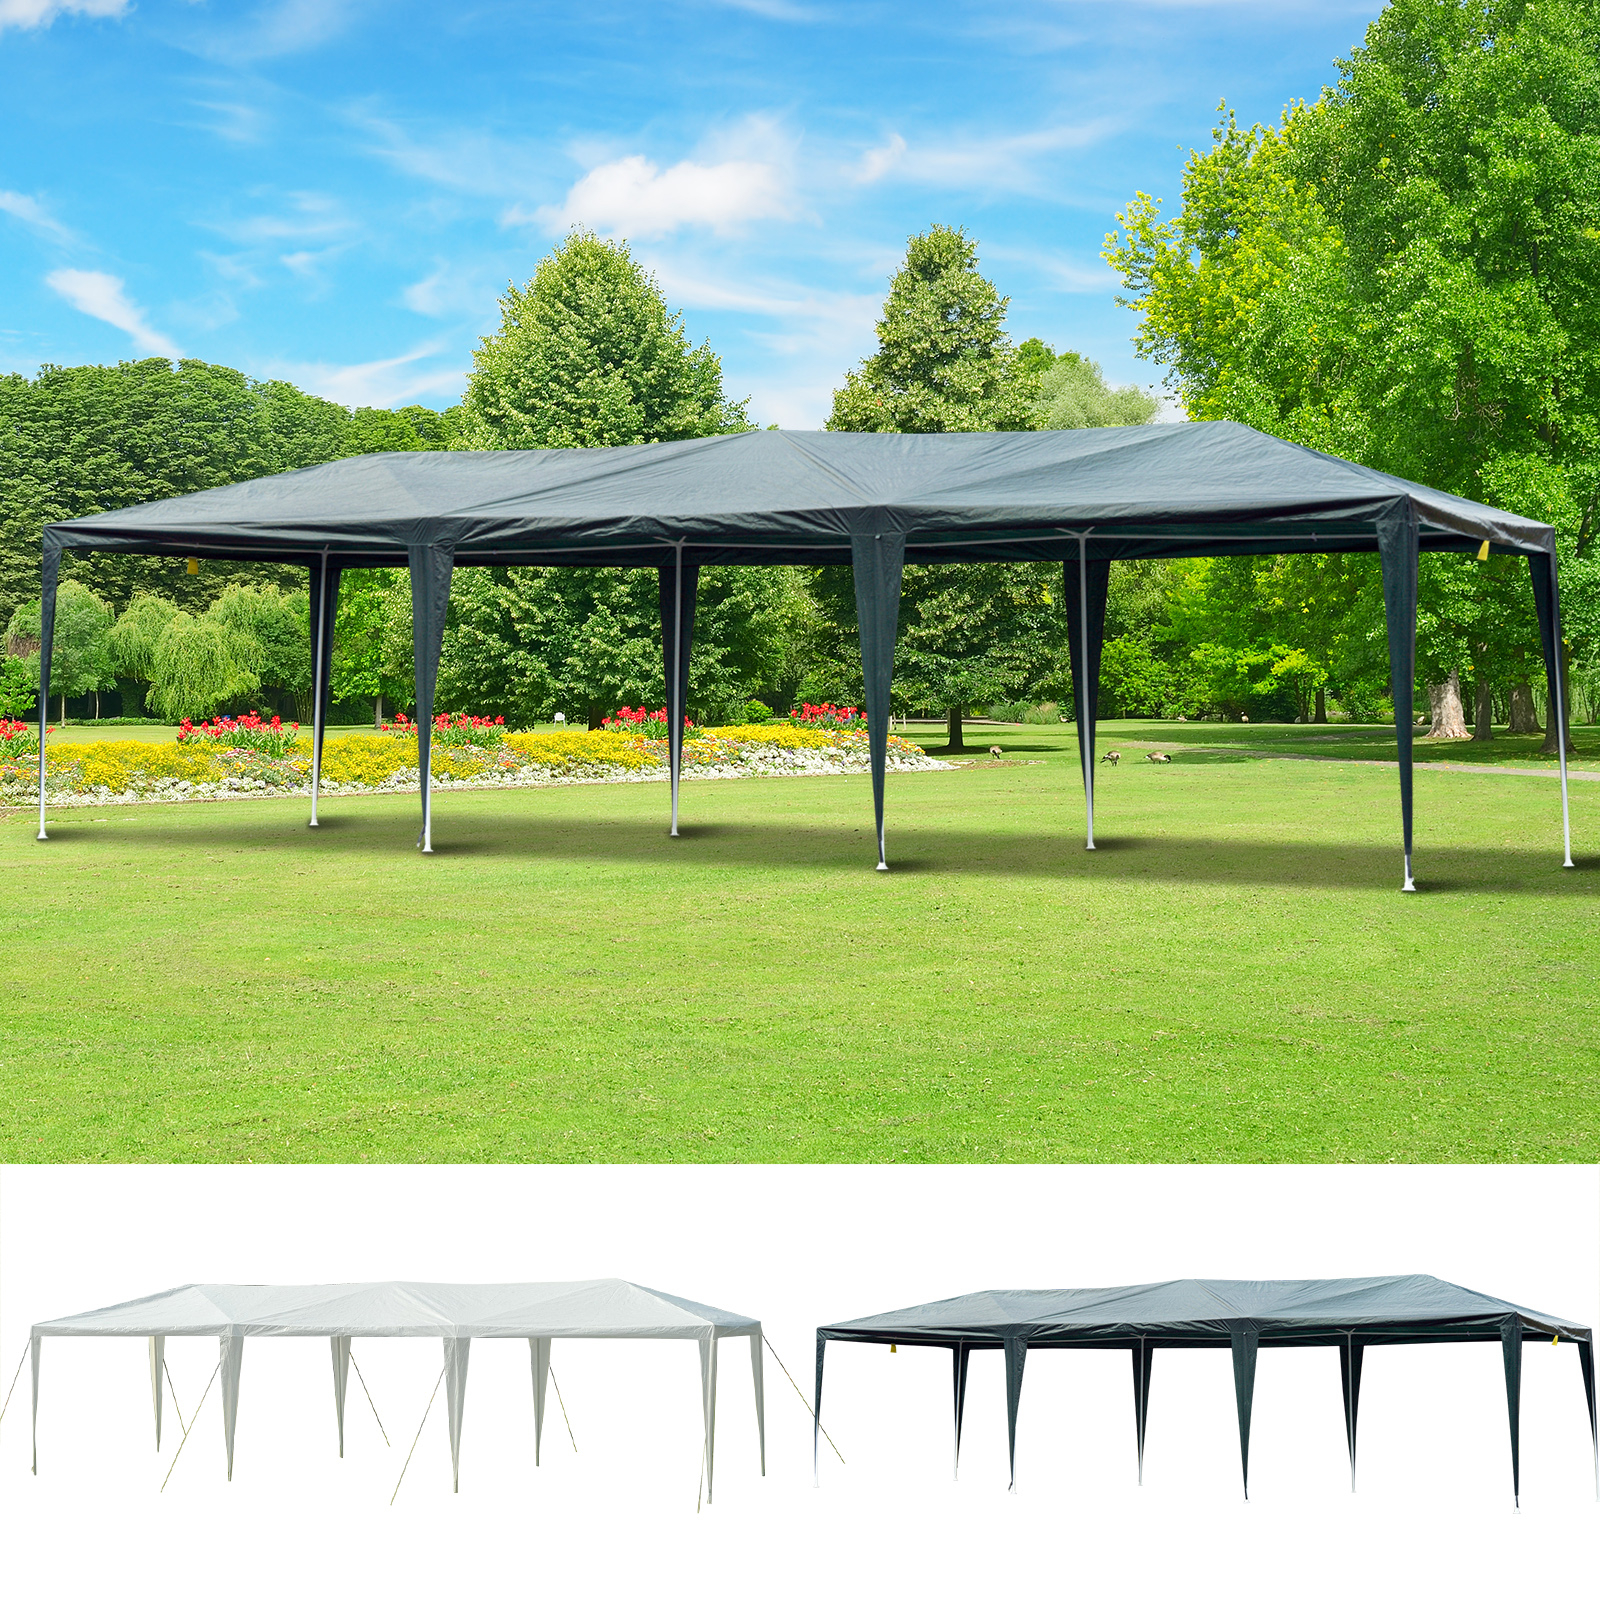 Details About 10 X 30 Gazebo Canopy Cover Party Tent With Removable Mesh Side Walls Patio regarding measurements 1600 X 1600